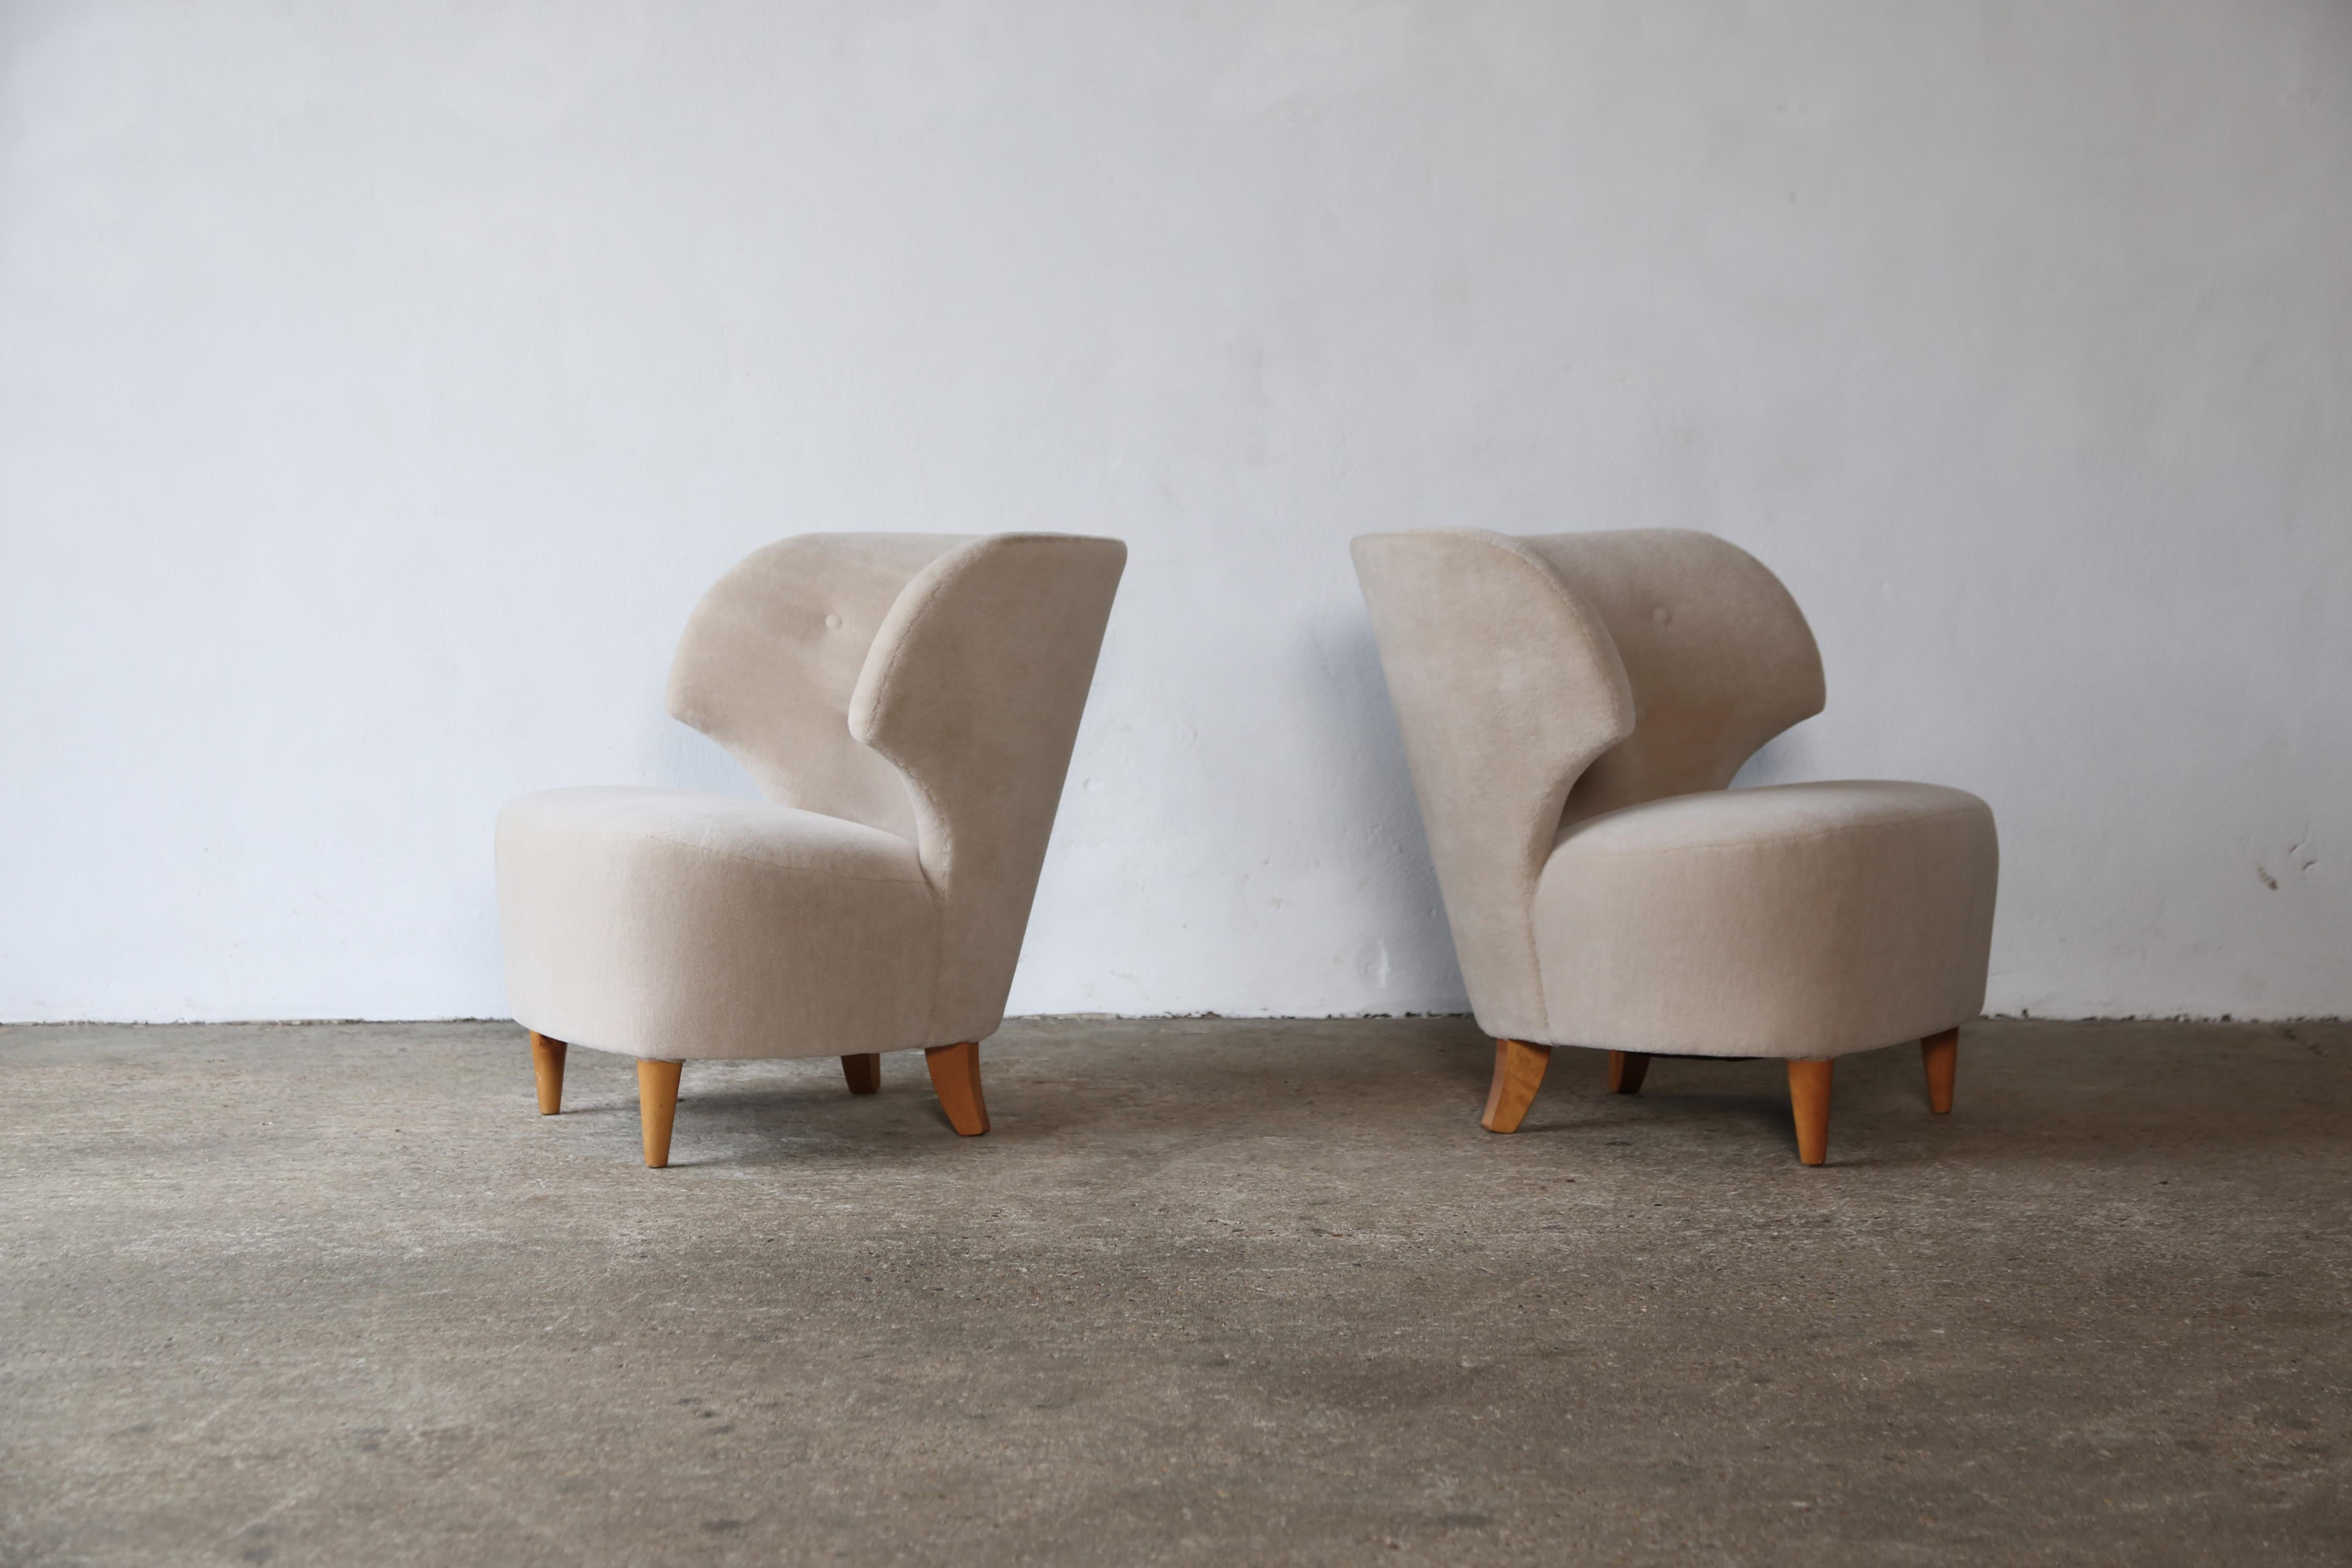 Mid-Century Modern Pair of Carl-Johan Boman Chairs, Finland, 1940s, Newly Upholstered in Alpaca